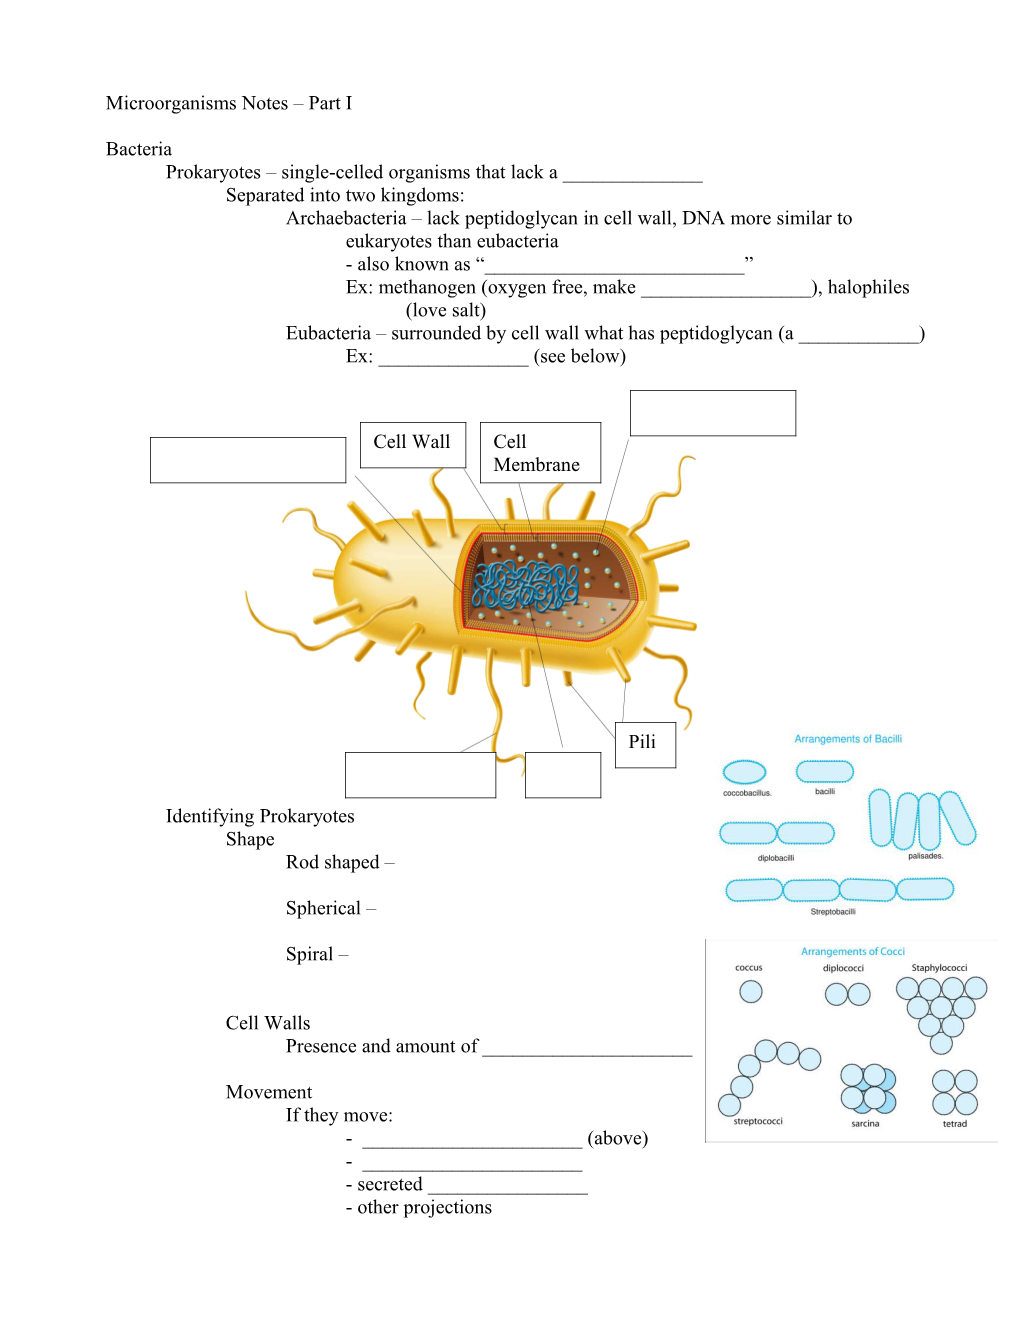 Microorganisms Notes Part I